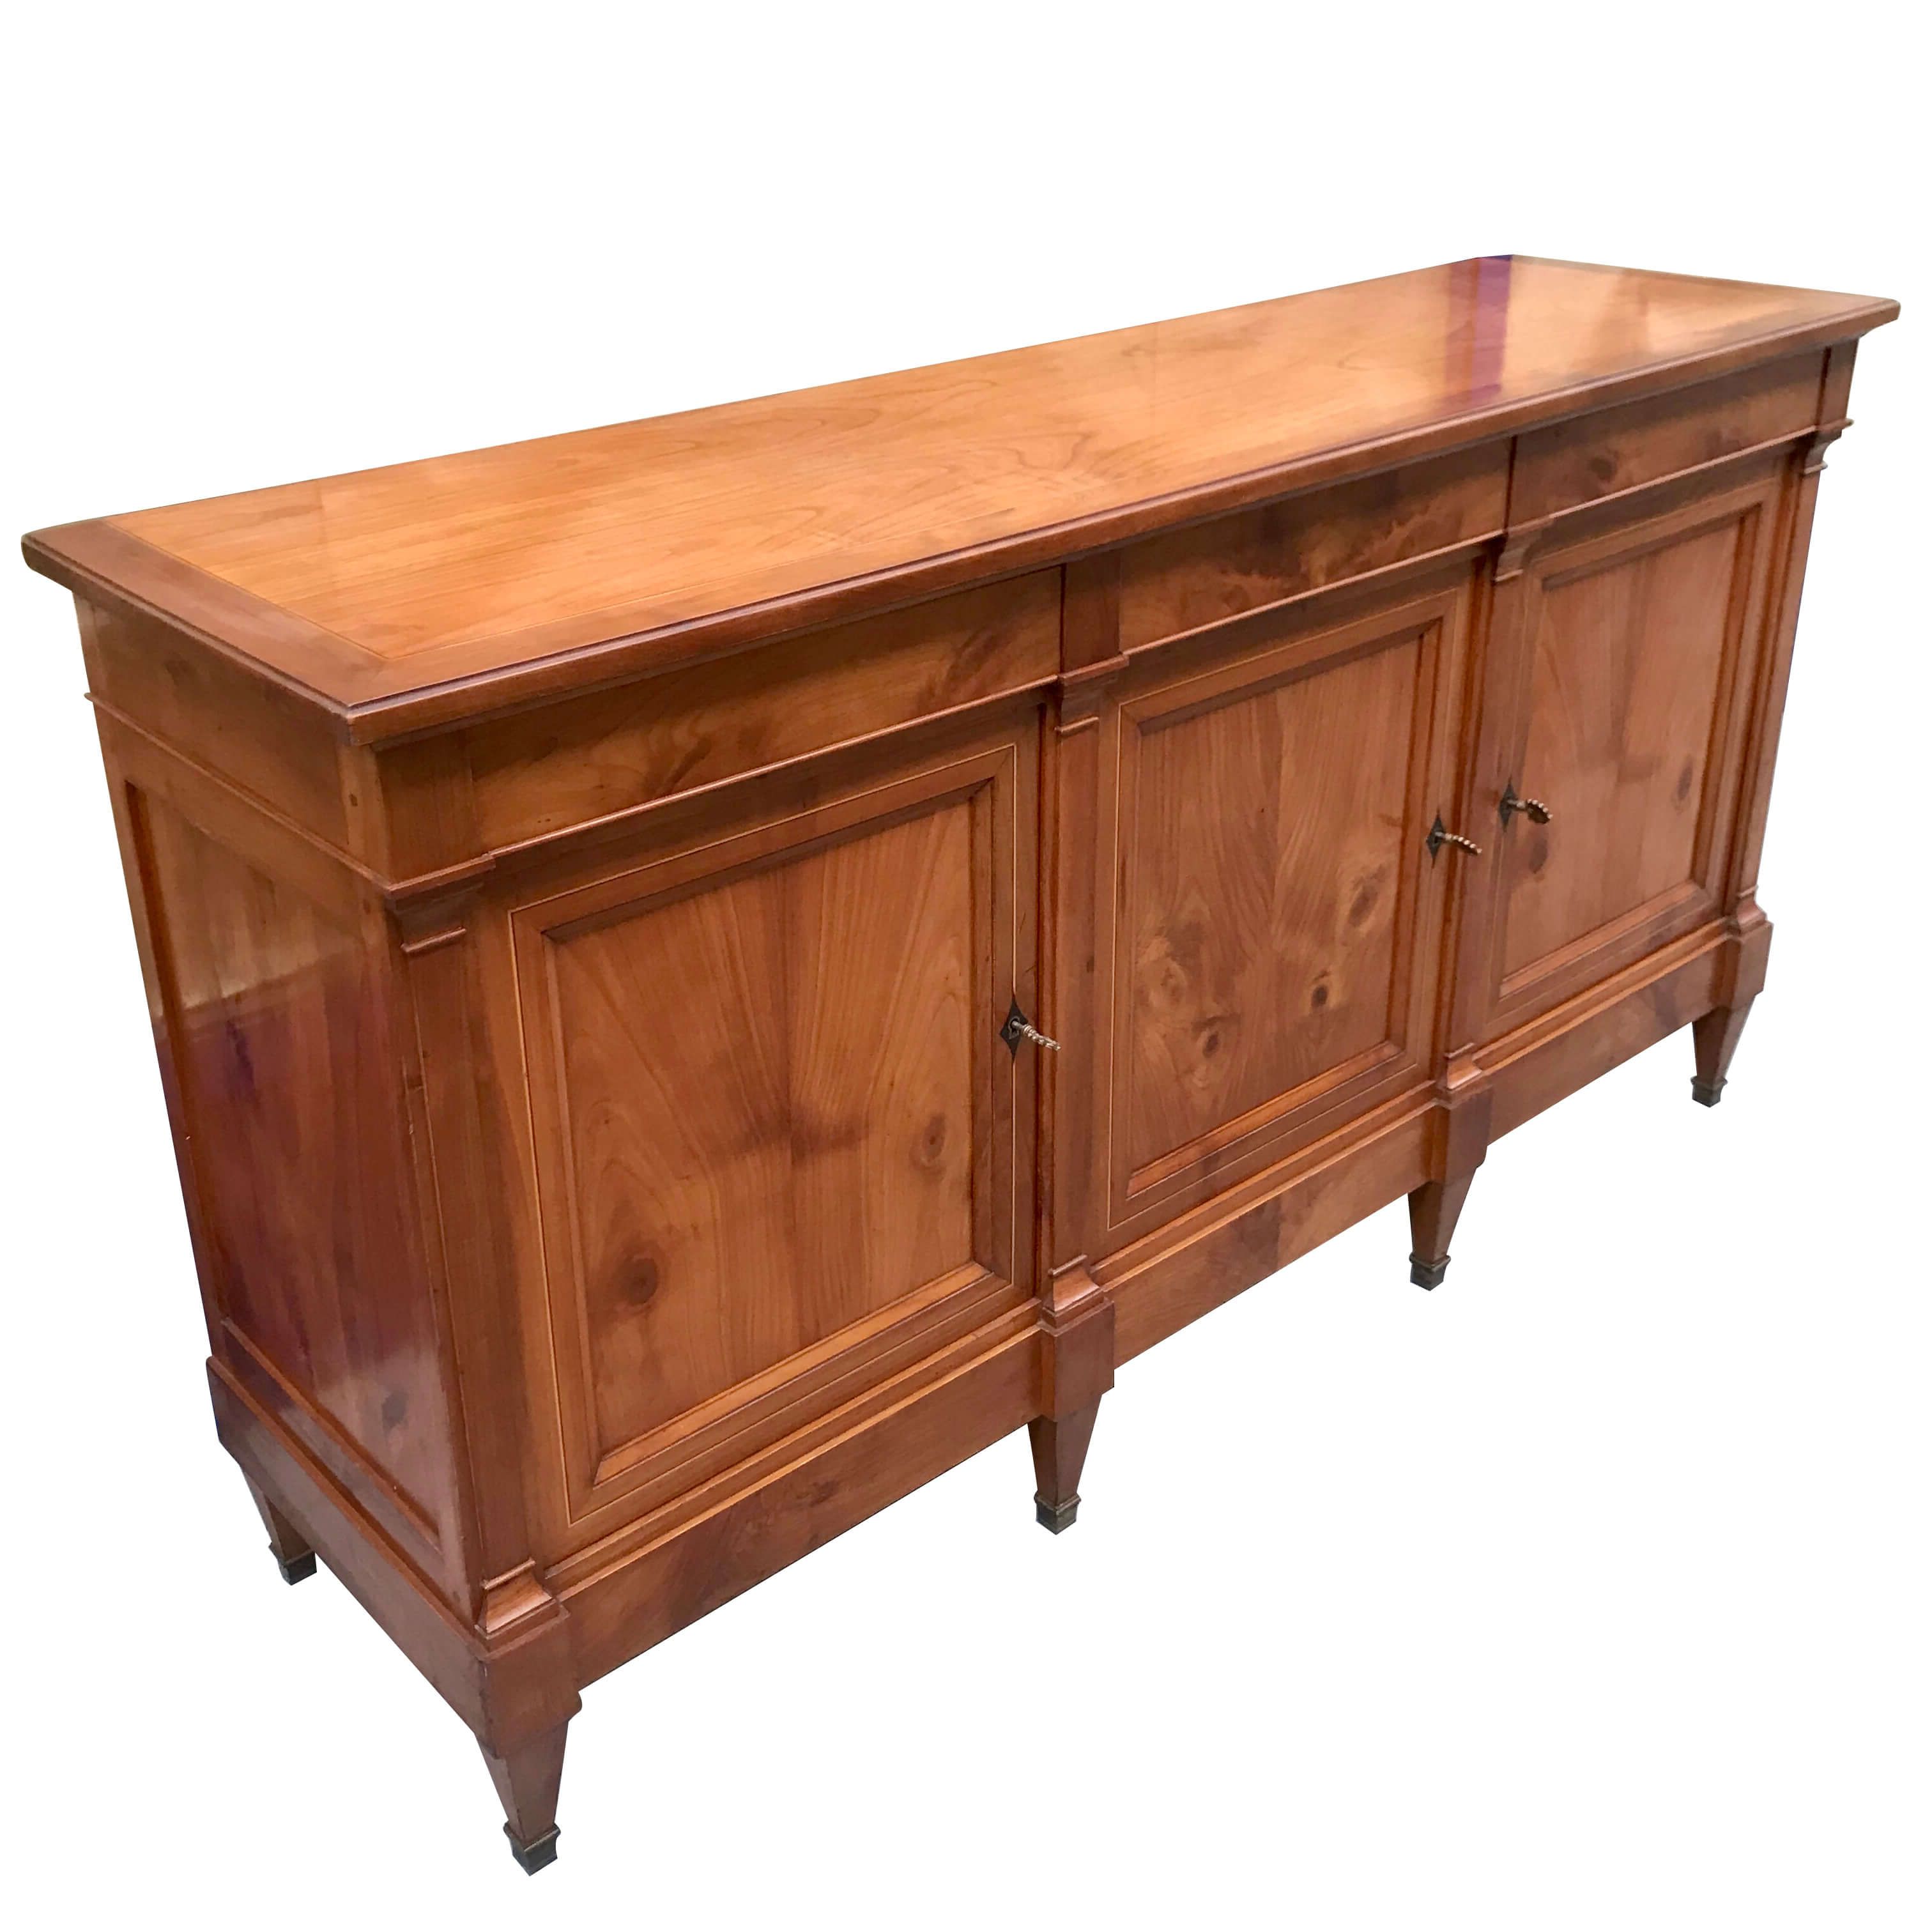 Trendy Directoire Style Sideboard With 3 Doors And 3 Drawers In Cherry Wood With  Inlaid Fillets And Bronze Brackets, 19th Century (View 10 of 10)